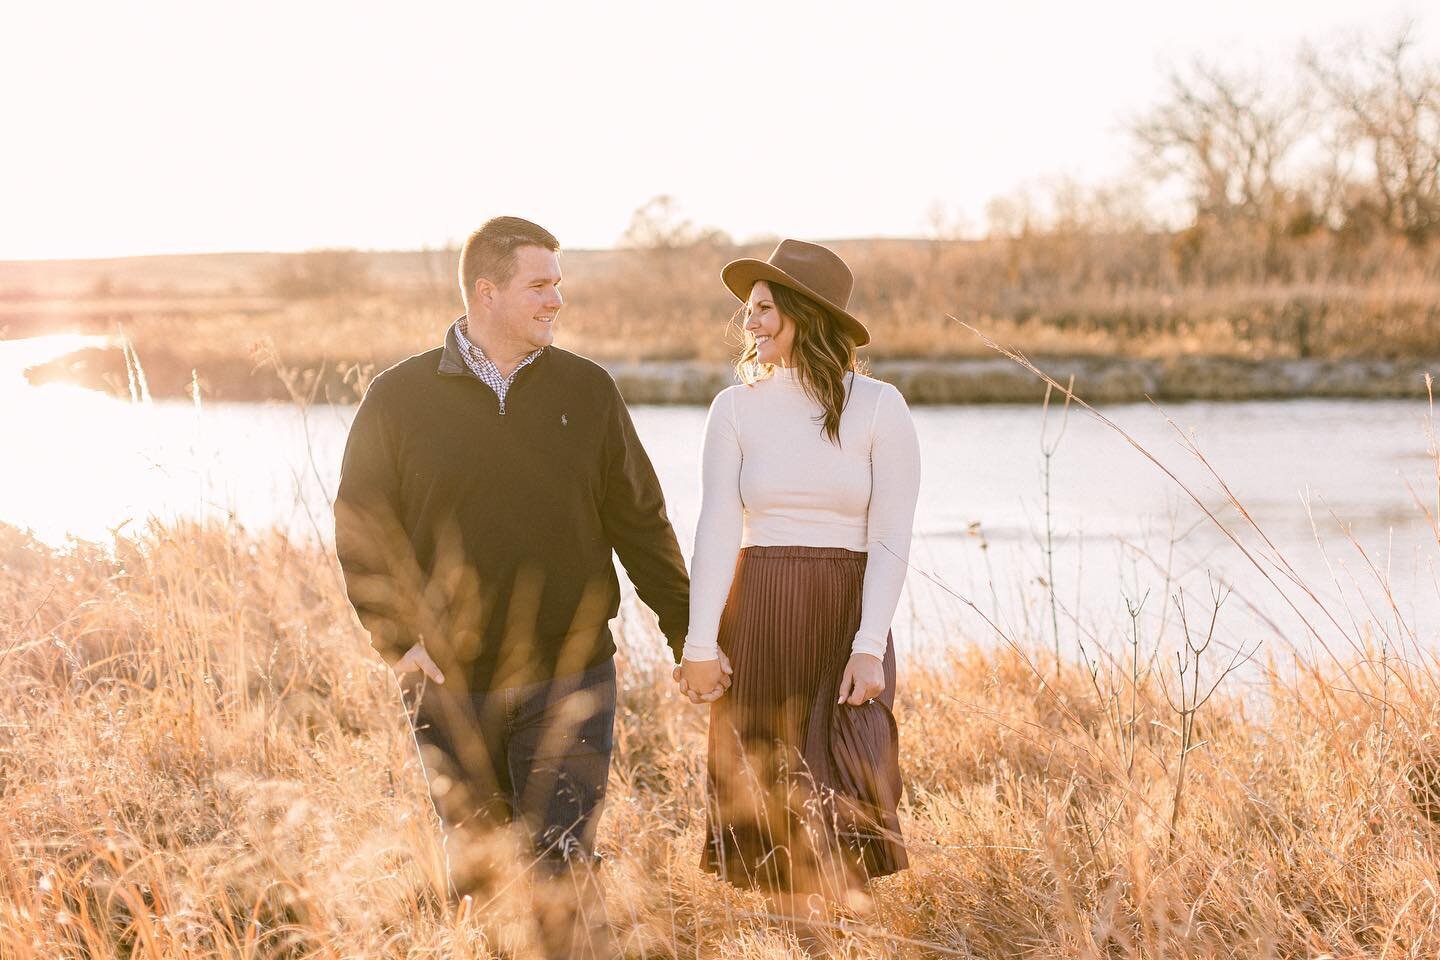 Easily one of my favorite engagement sessions ever. Claire and Nick made this one an adventure! We went off-road to get to some cool river spots and ended the night by driving around to find his &ldquo;other girls&rdquo;, just as the sun was setting.